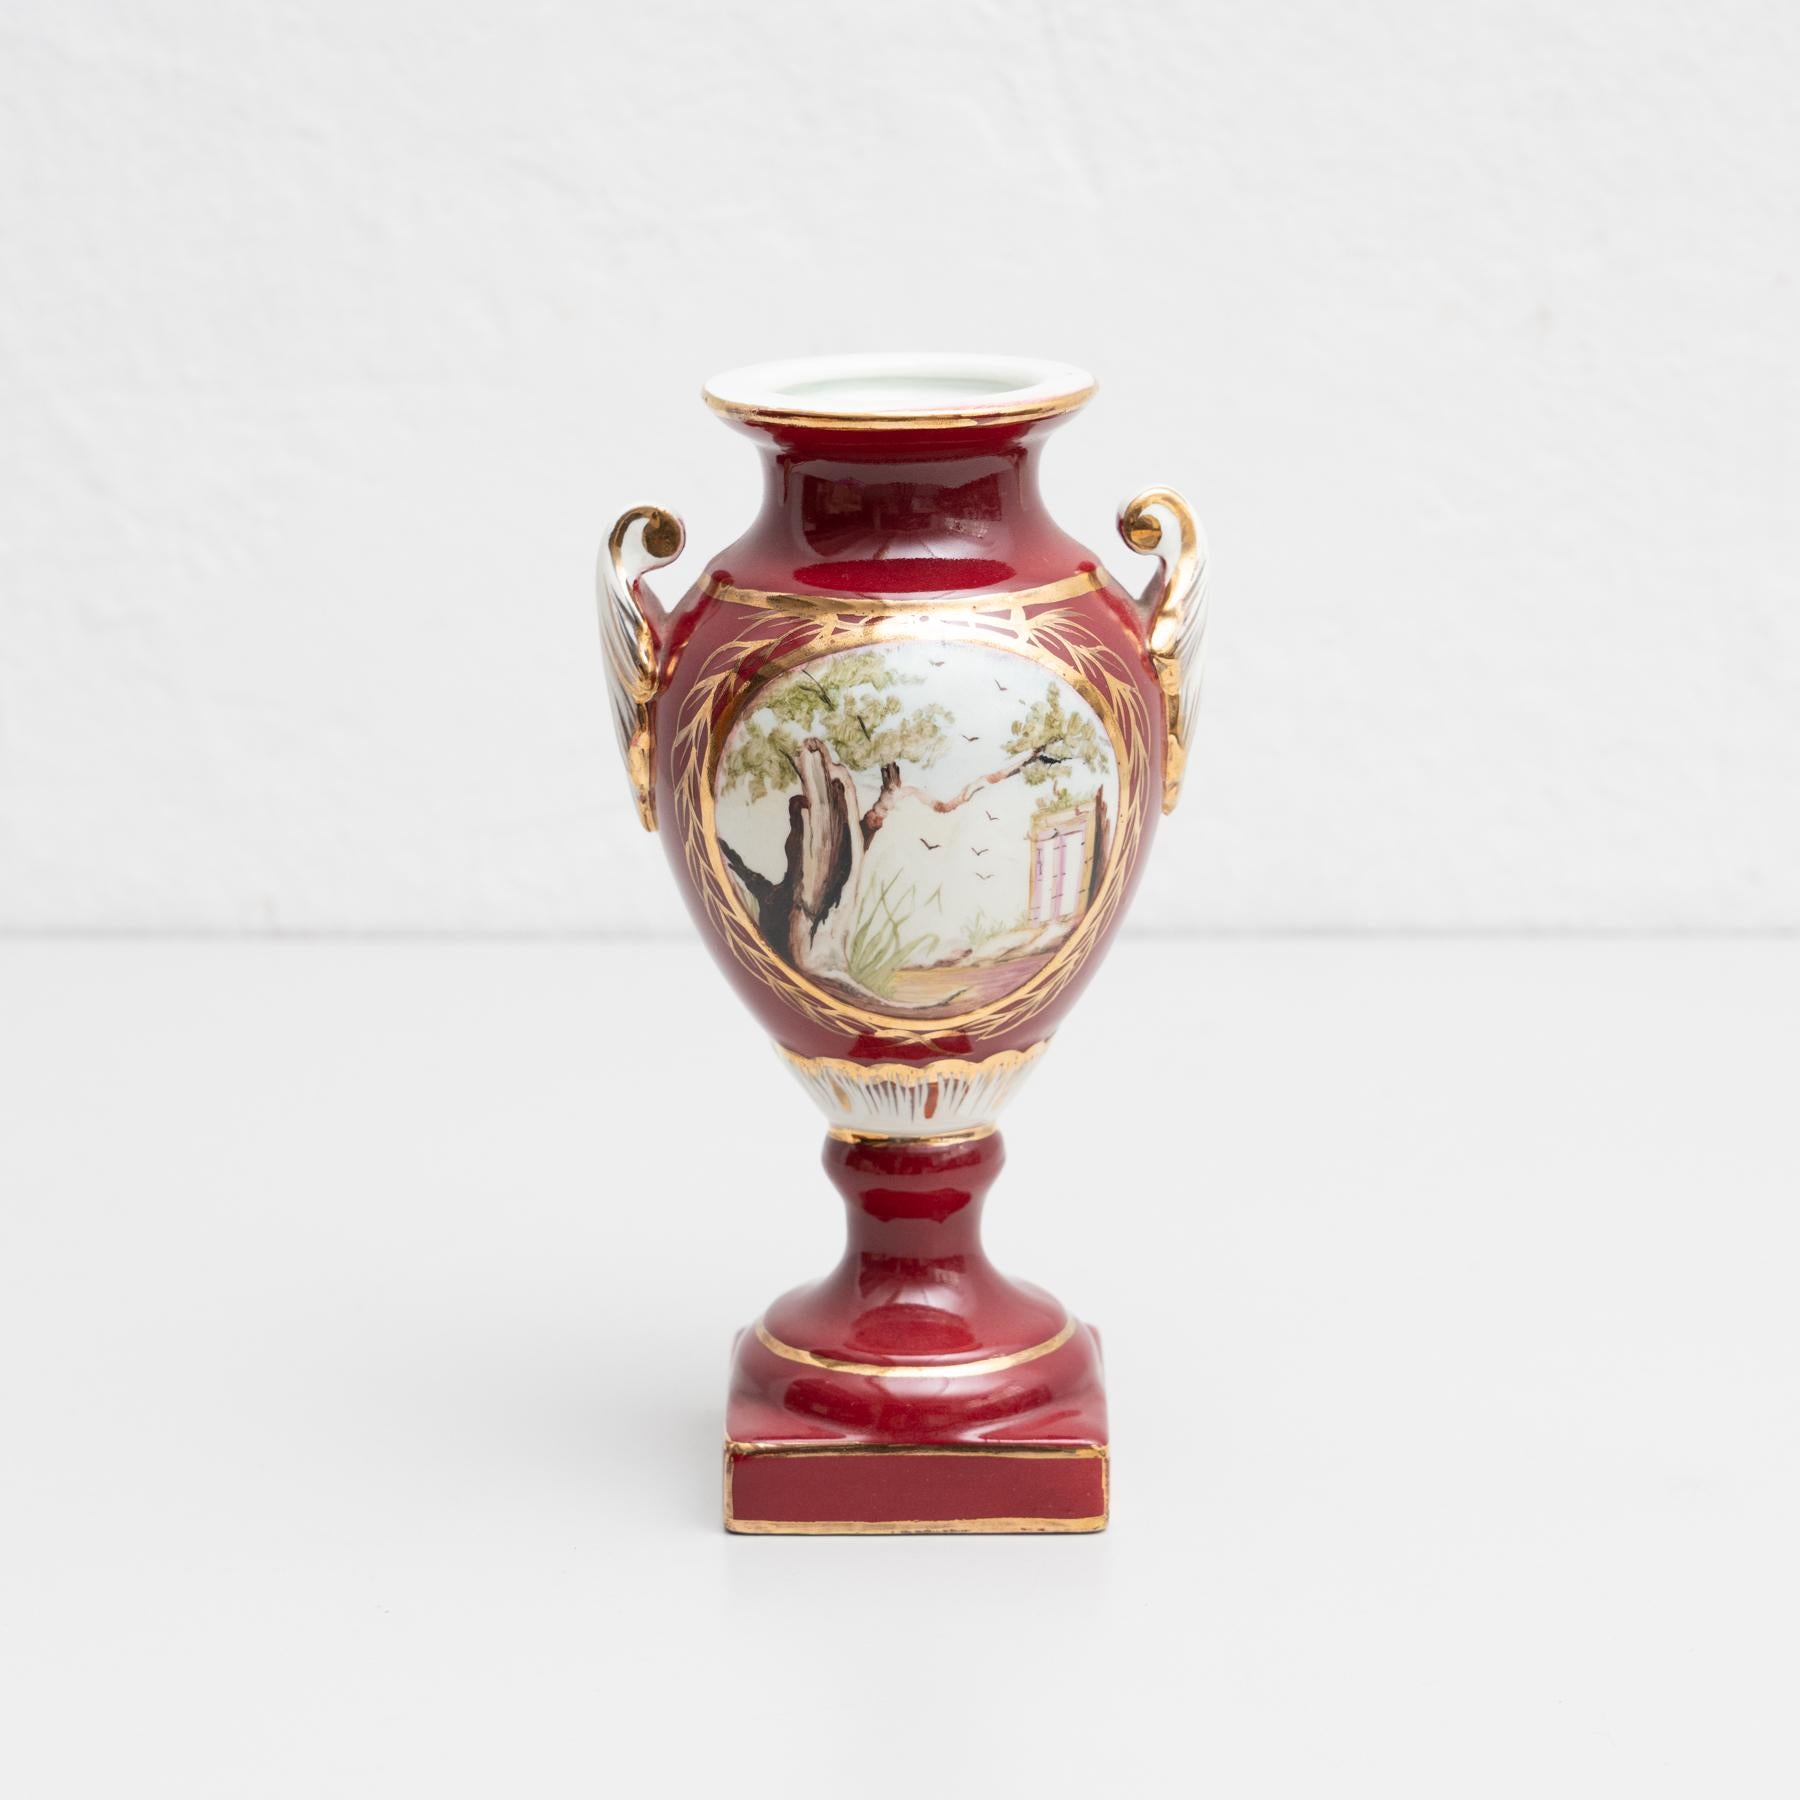 Isabelline hand-painted porcelain vase in the Serves style. Beautifully decorated with a nice scene on the front side.

Made by unknown manufacturer in Spain, circa 19th Century.

In original condition, with minor wear consistent with age and